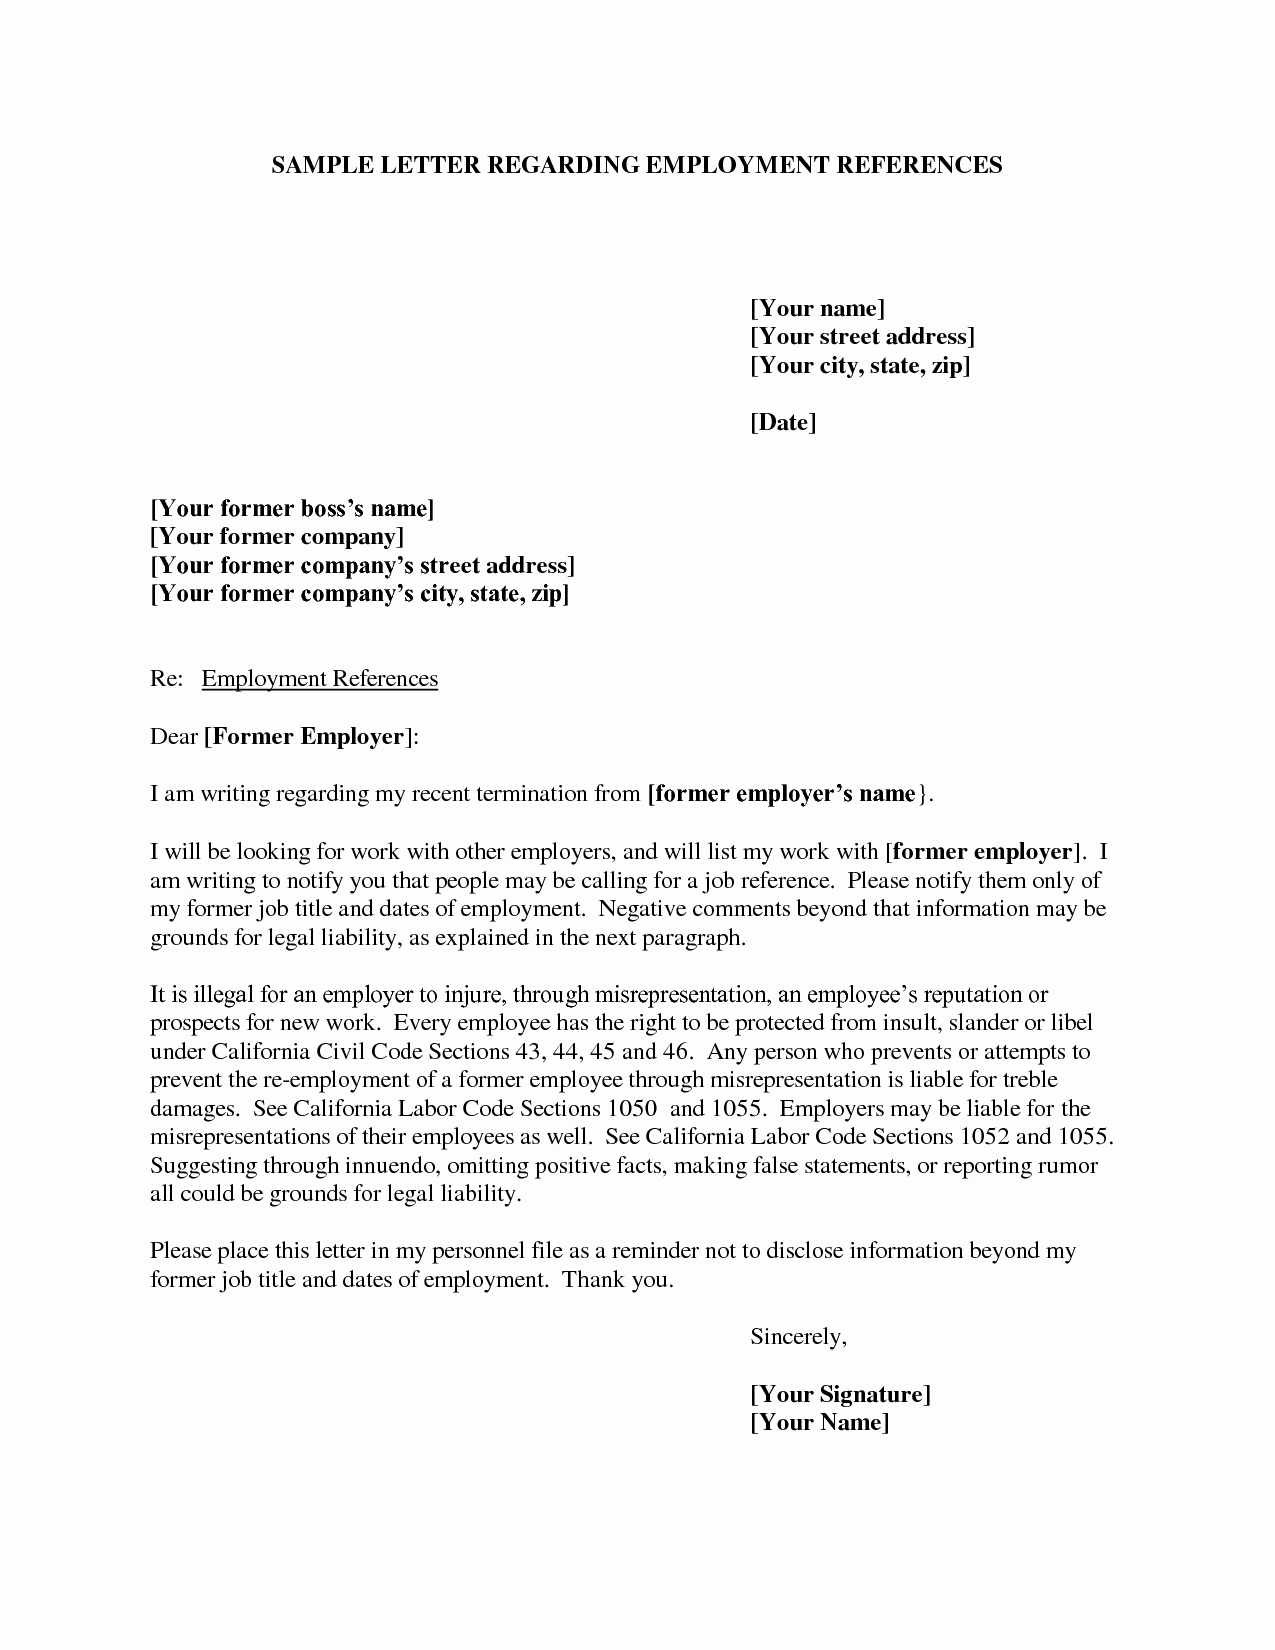 Letter Of Recommendation Request Samples Beautiful Examples Reference Letters Employmentexamples Of